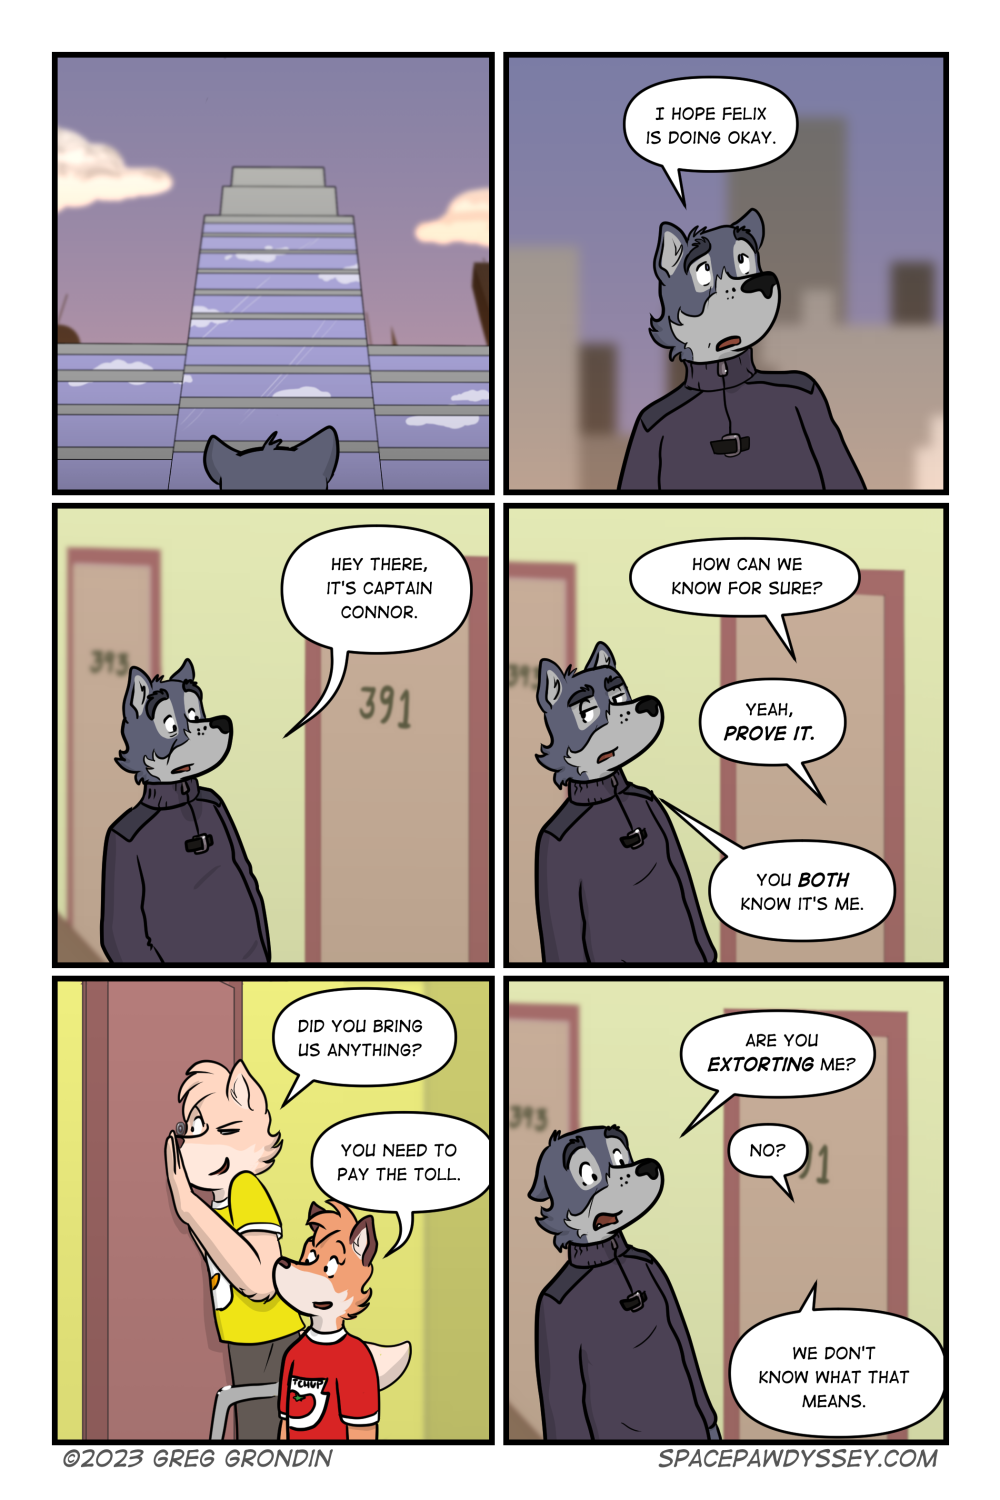 Space Pawdyssey #642